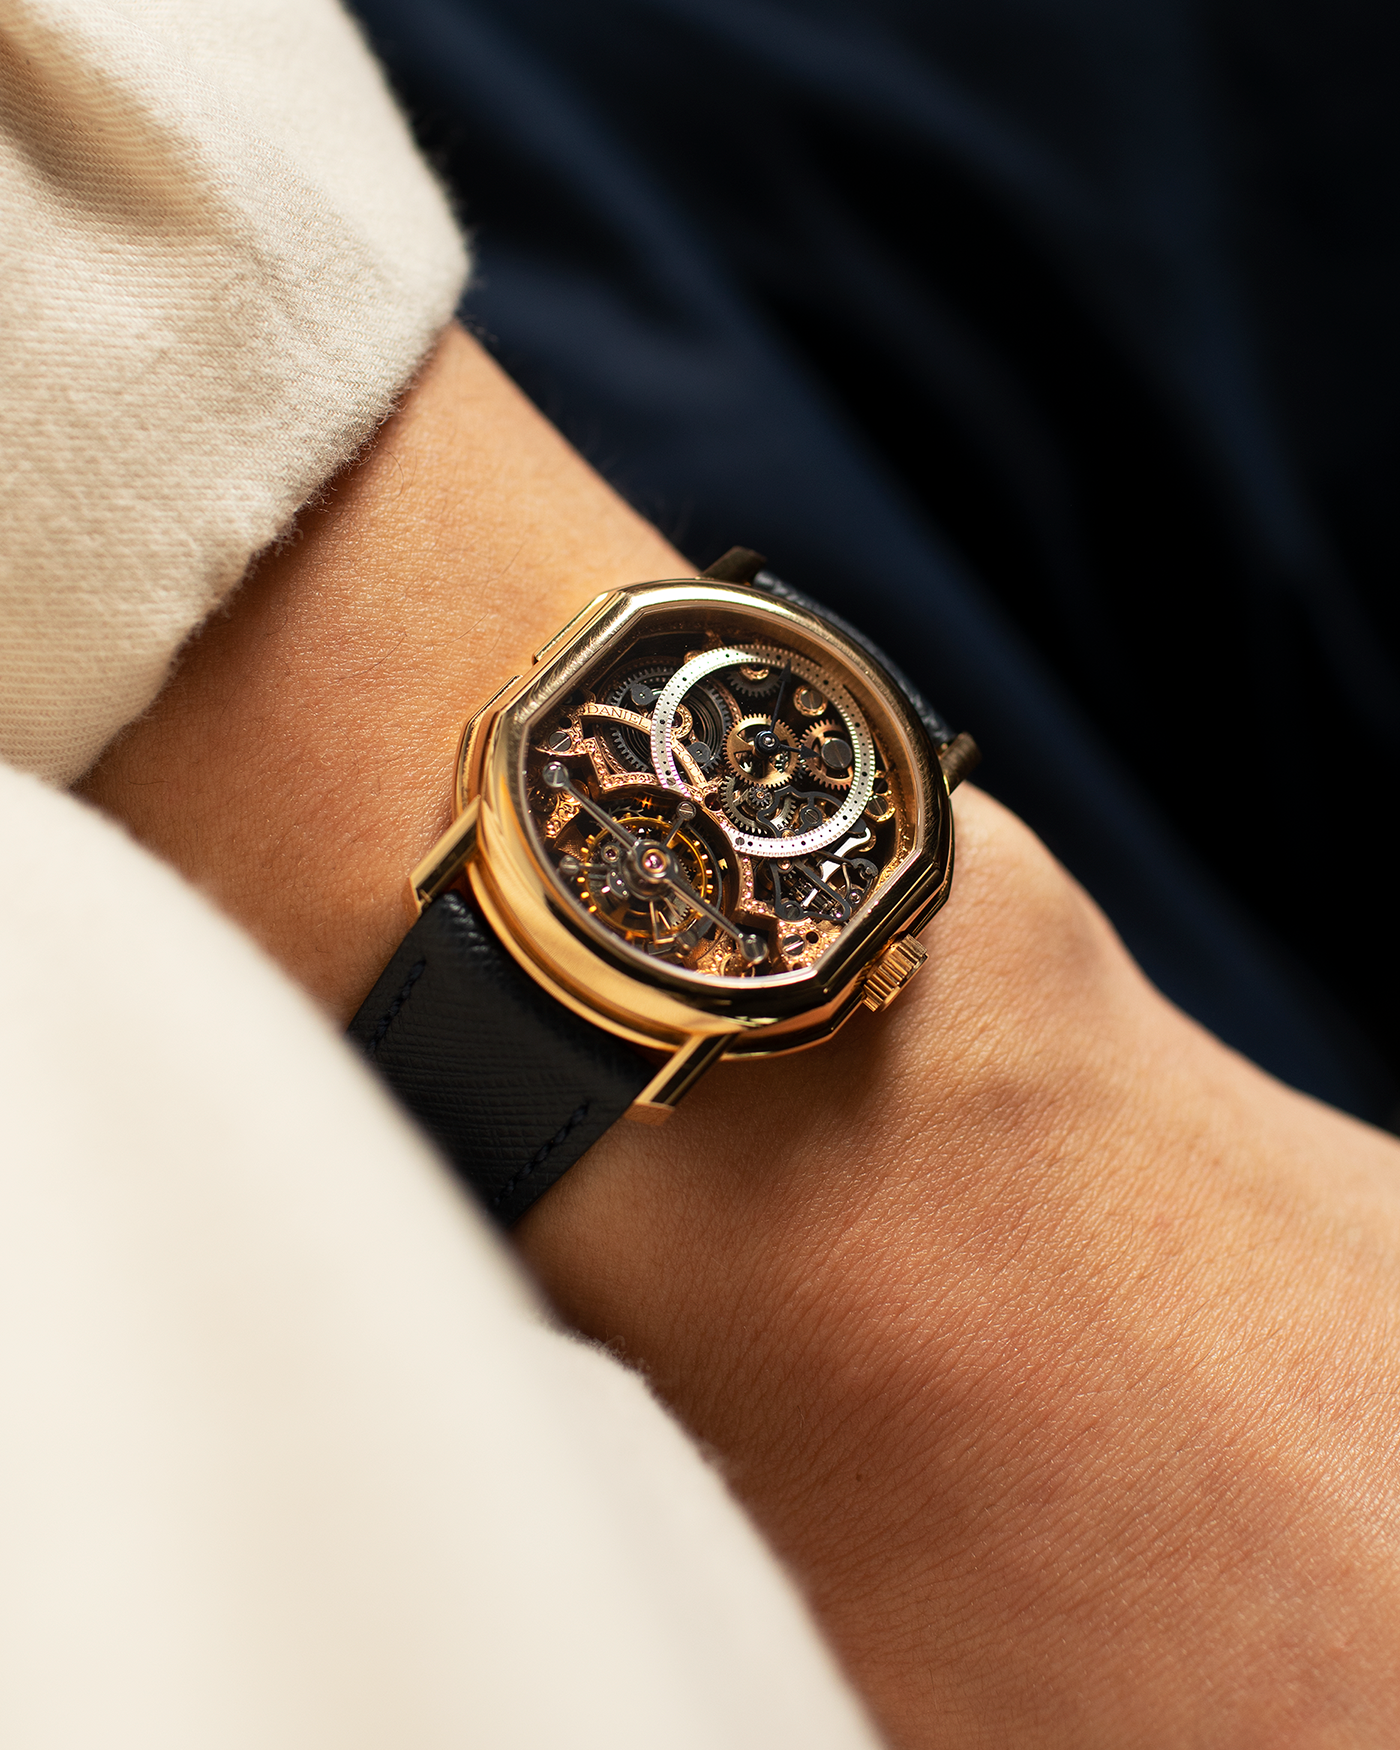 Brand: Daniel Roth Year: 1990’s Model: 2187 Material: 18k Yellow Gold Movement: Cal. DR 307 One-Minute Tourbillon Regulator Case Diameter: 35mm X 38mm Strap: Molequin Navy Blue Textured Calf and18k Yellow Gold Tang Buckle